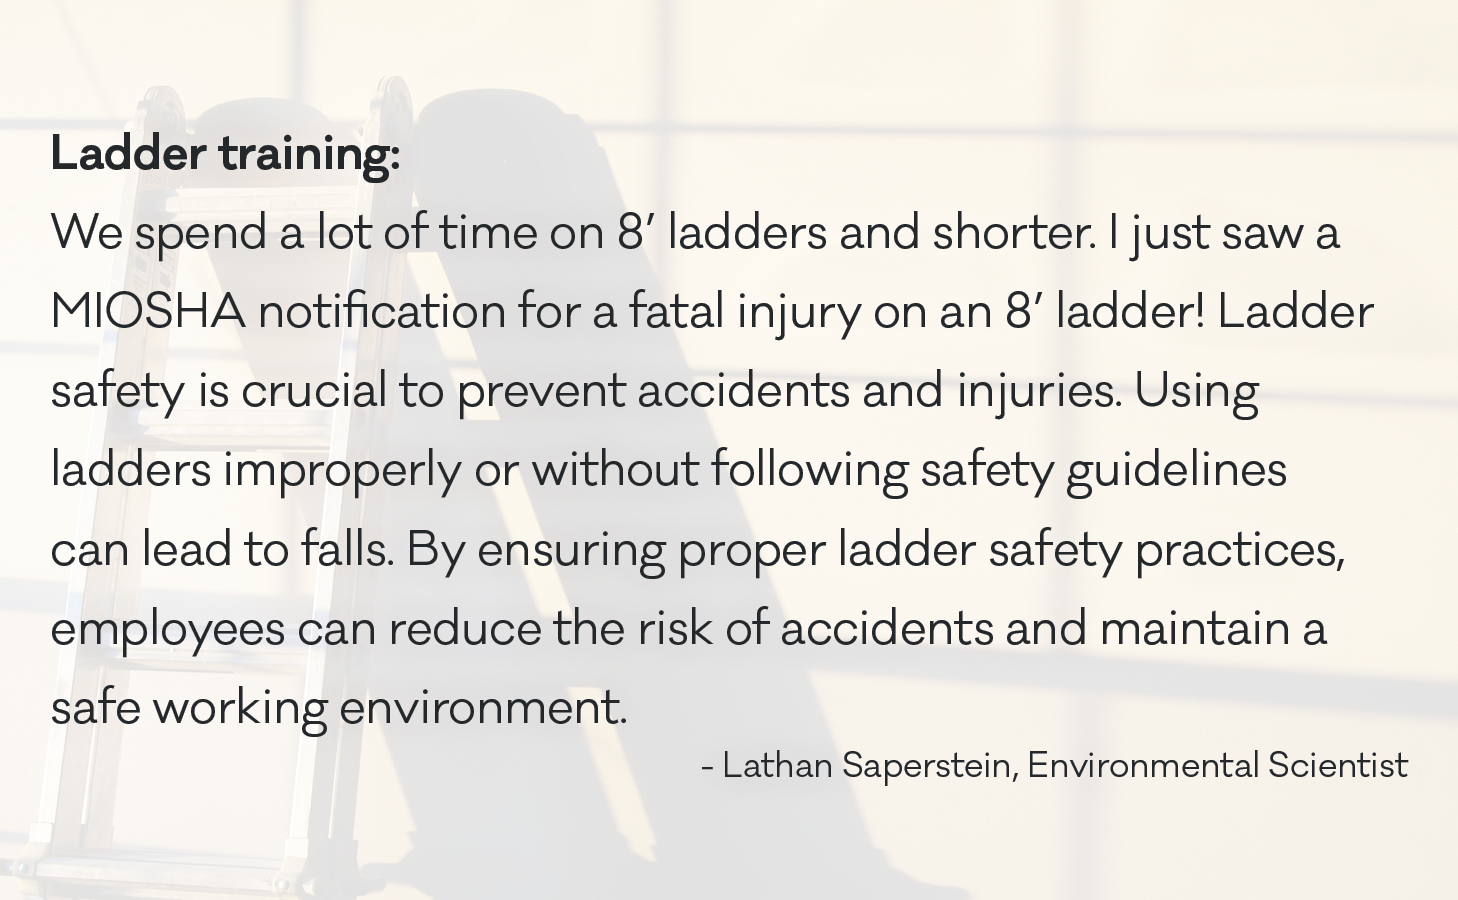 We spend a lot of time on 8’ ladders and shorter. I just saw a MIOSHA notification for a fatal injury on an 8’ ladder! Ladder safety is crucial to prevent accidents and injuries. Using ladders improperly or without following safety guidelines can lead to falls. By ensuring proper ladder safety practices, employees can reduce the risk of accidents and maintain a safe working environment.